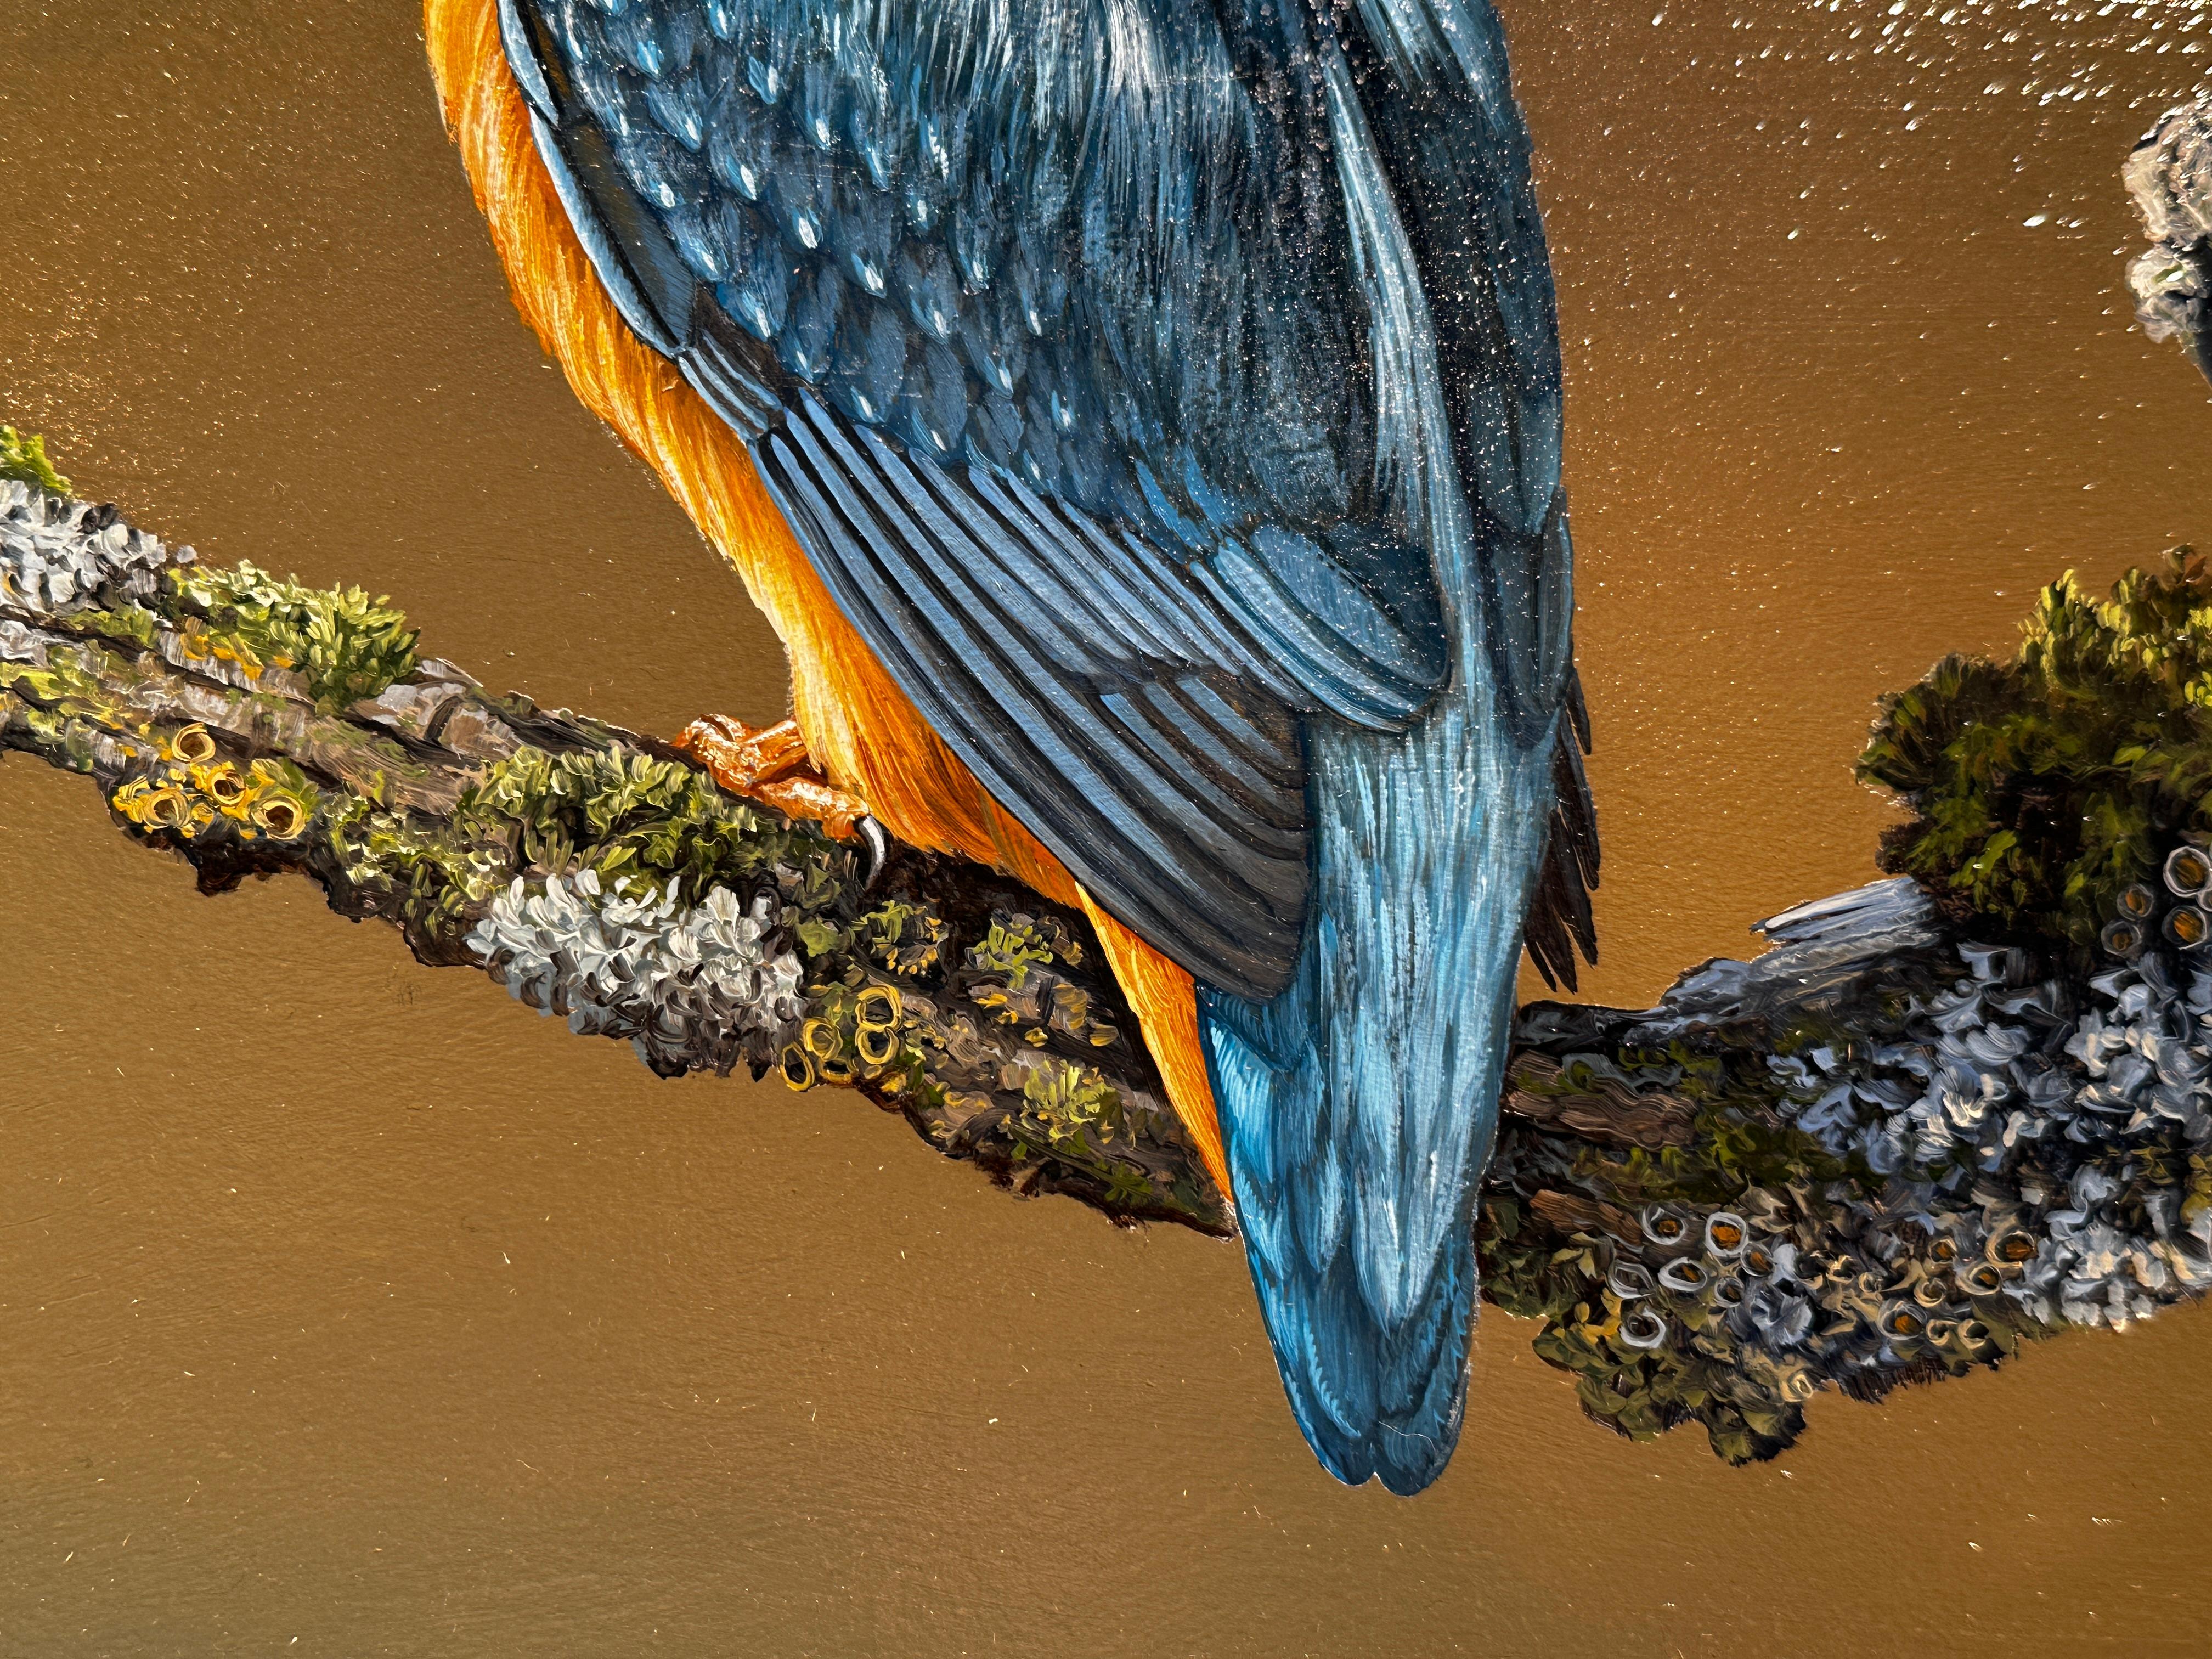 'A Moments Rest' by Ben Waddams is a Contemporary Realist Wildlife oil painting of a Kingfisher perched on a branch.  With such incredible detail you can almost feel feathers and expect the bird to dash and fly off. 

Ben Waddams is a British